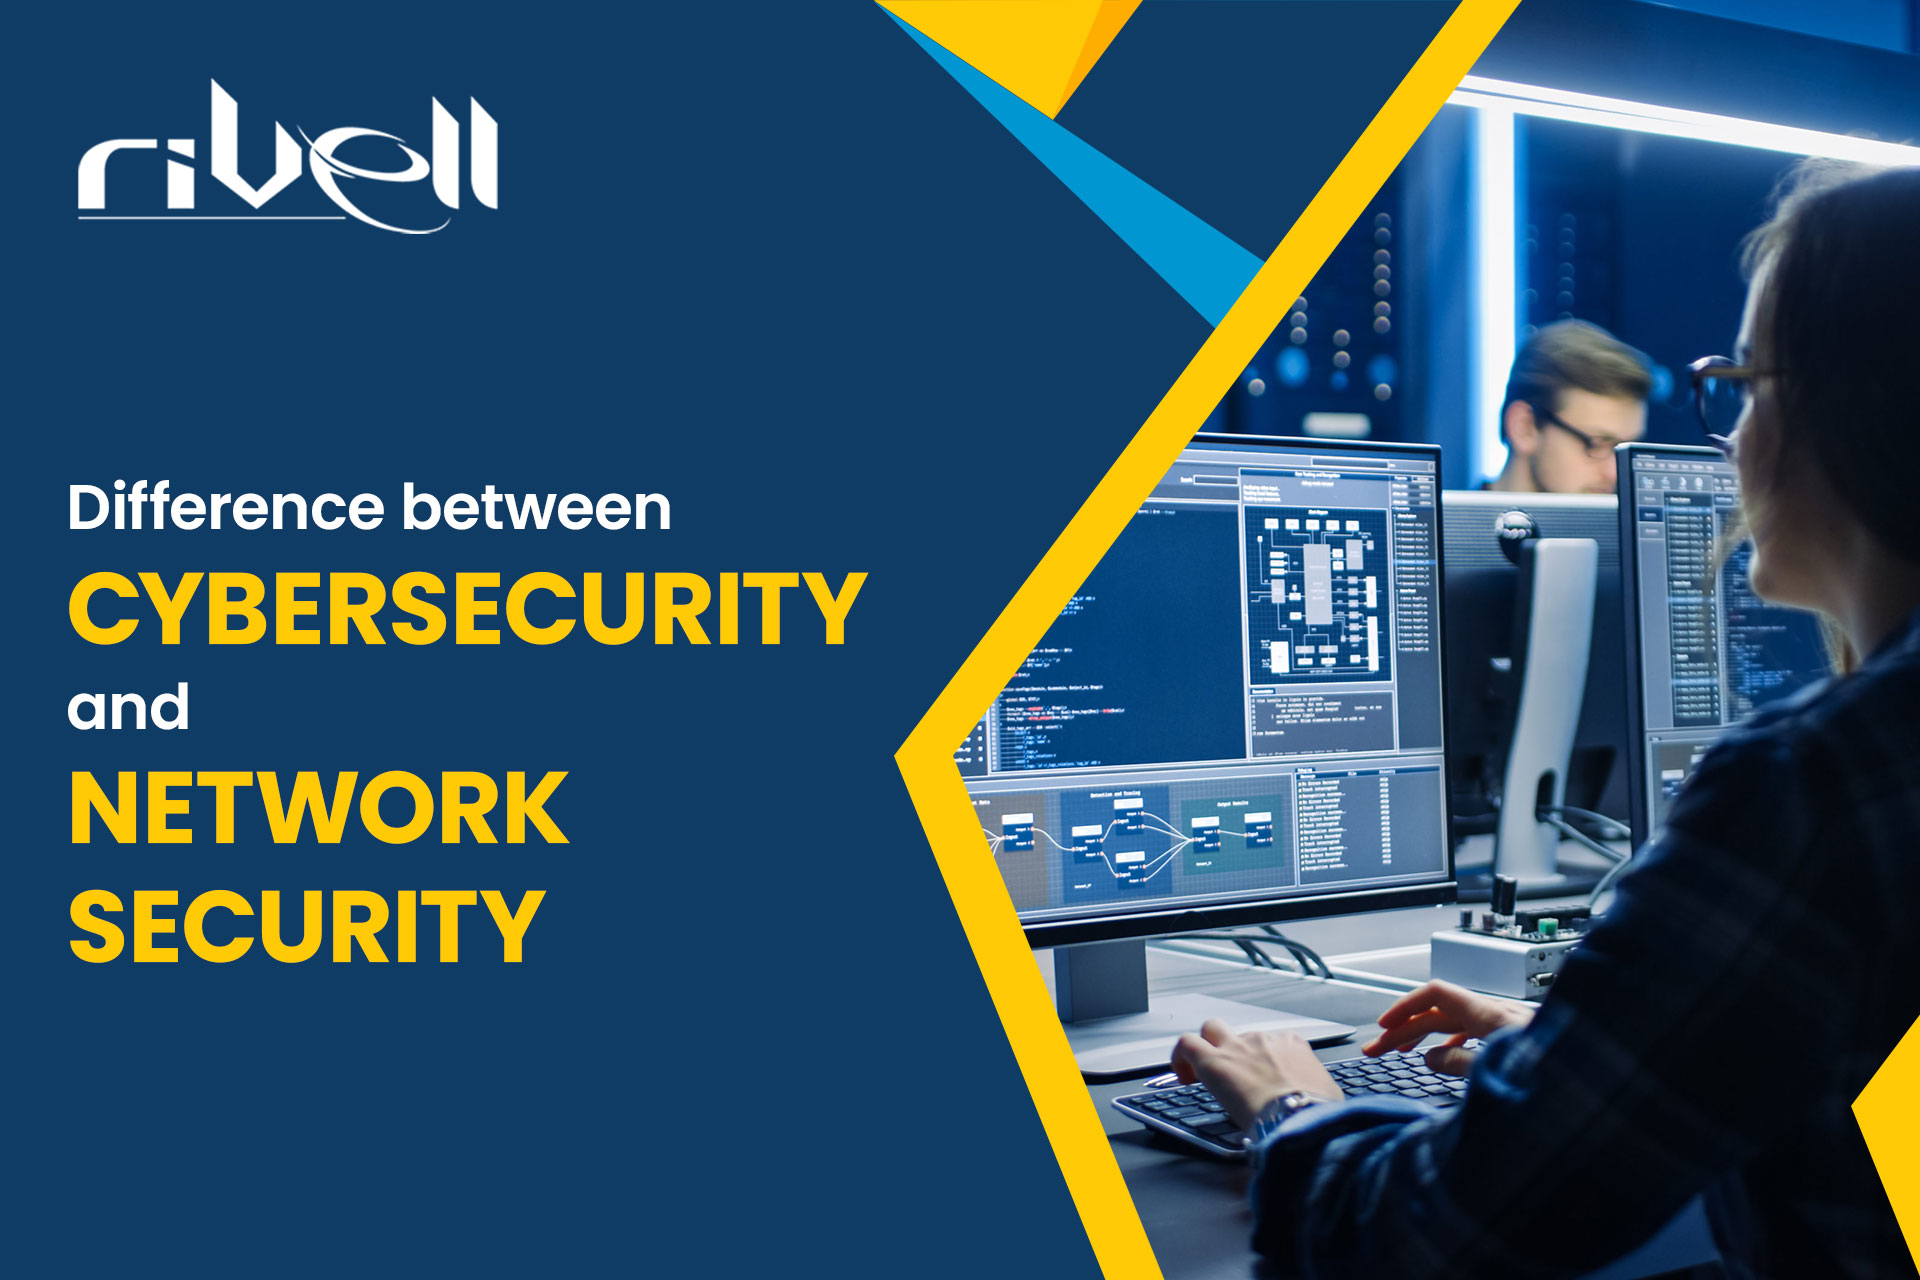 Difference between cybersecurity and network security